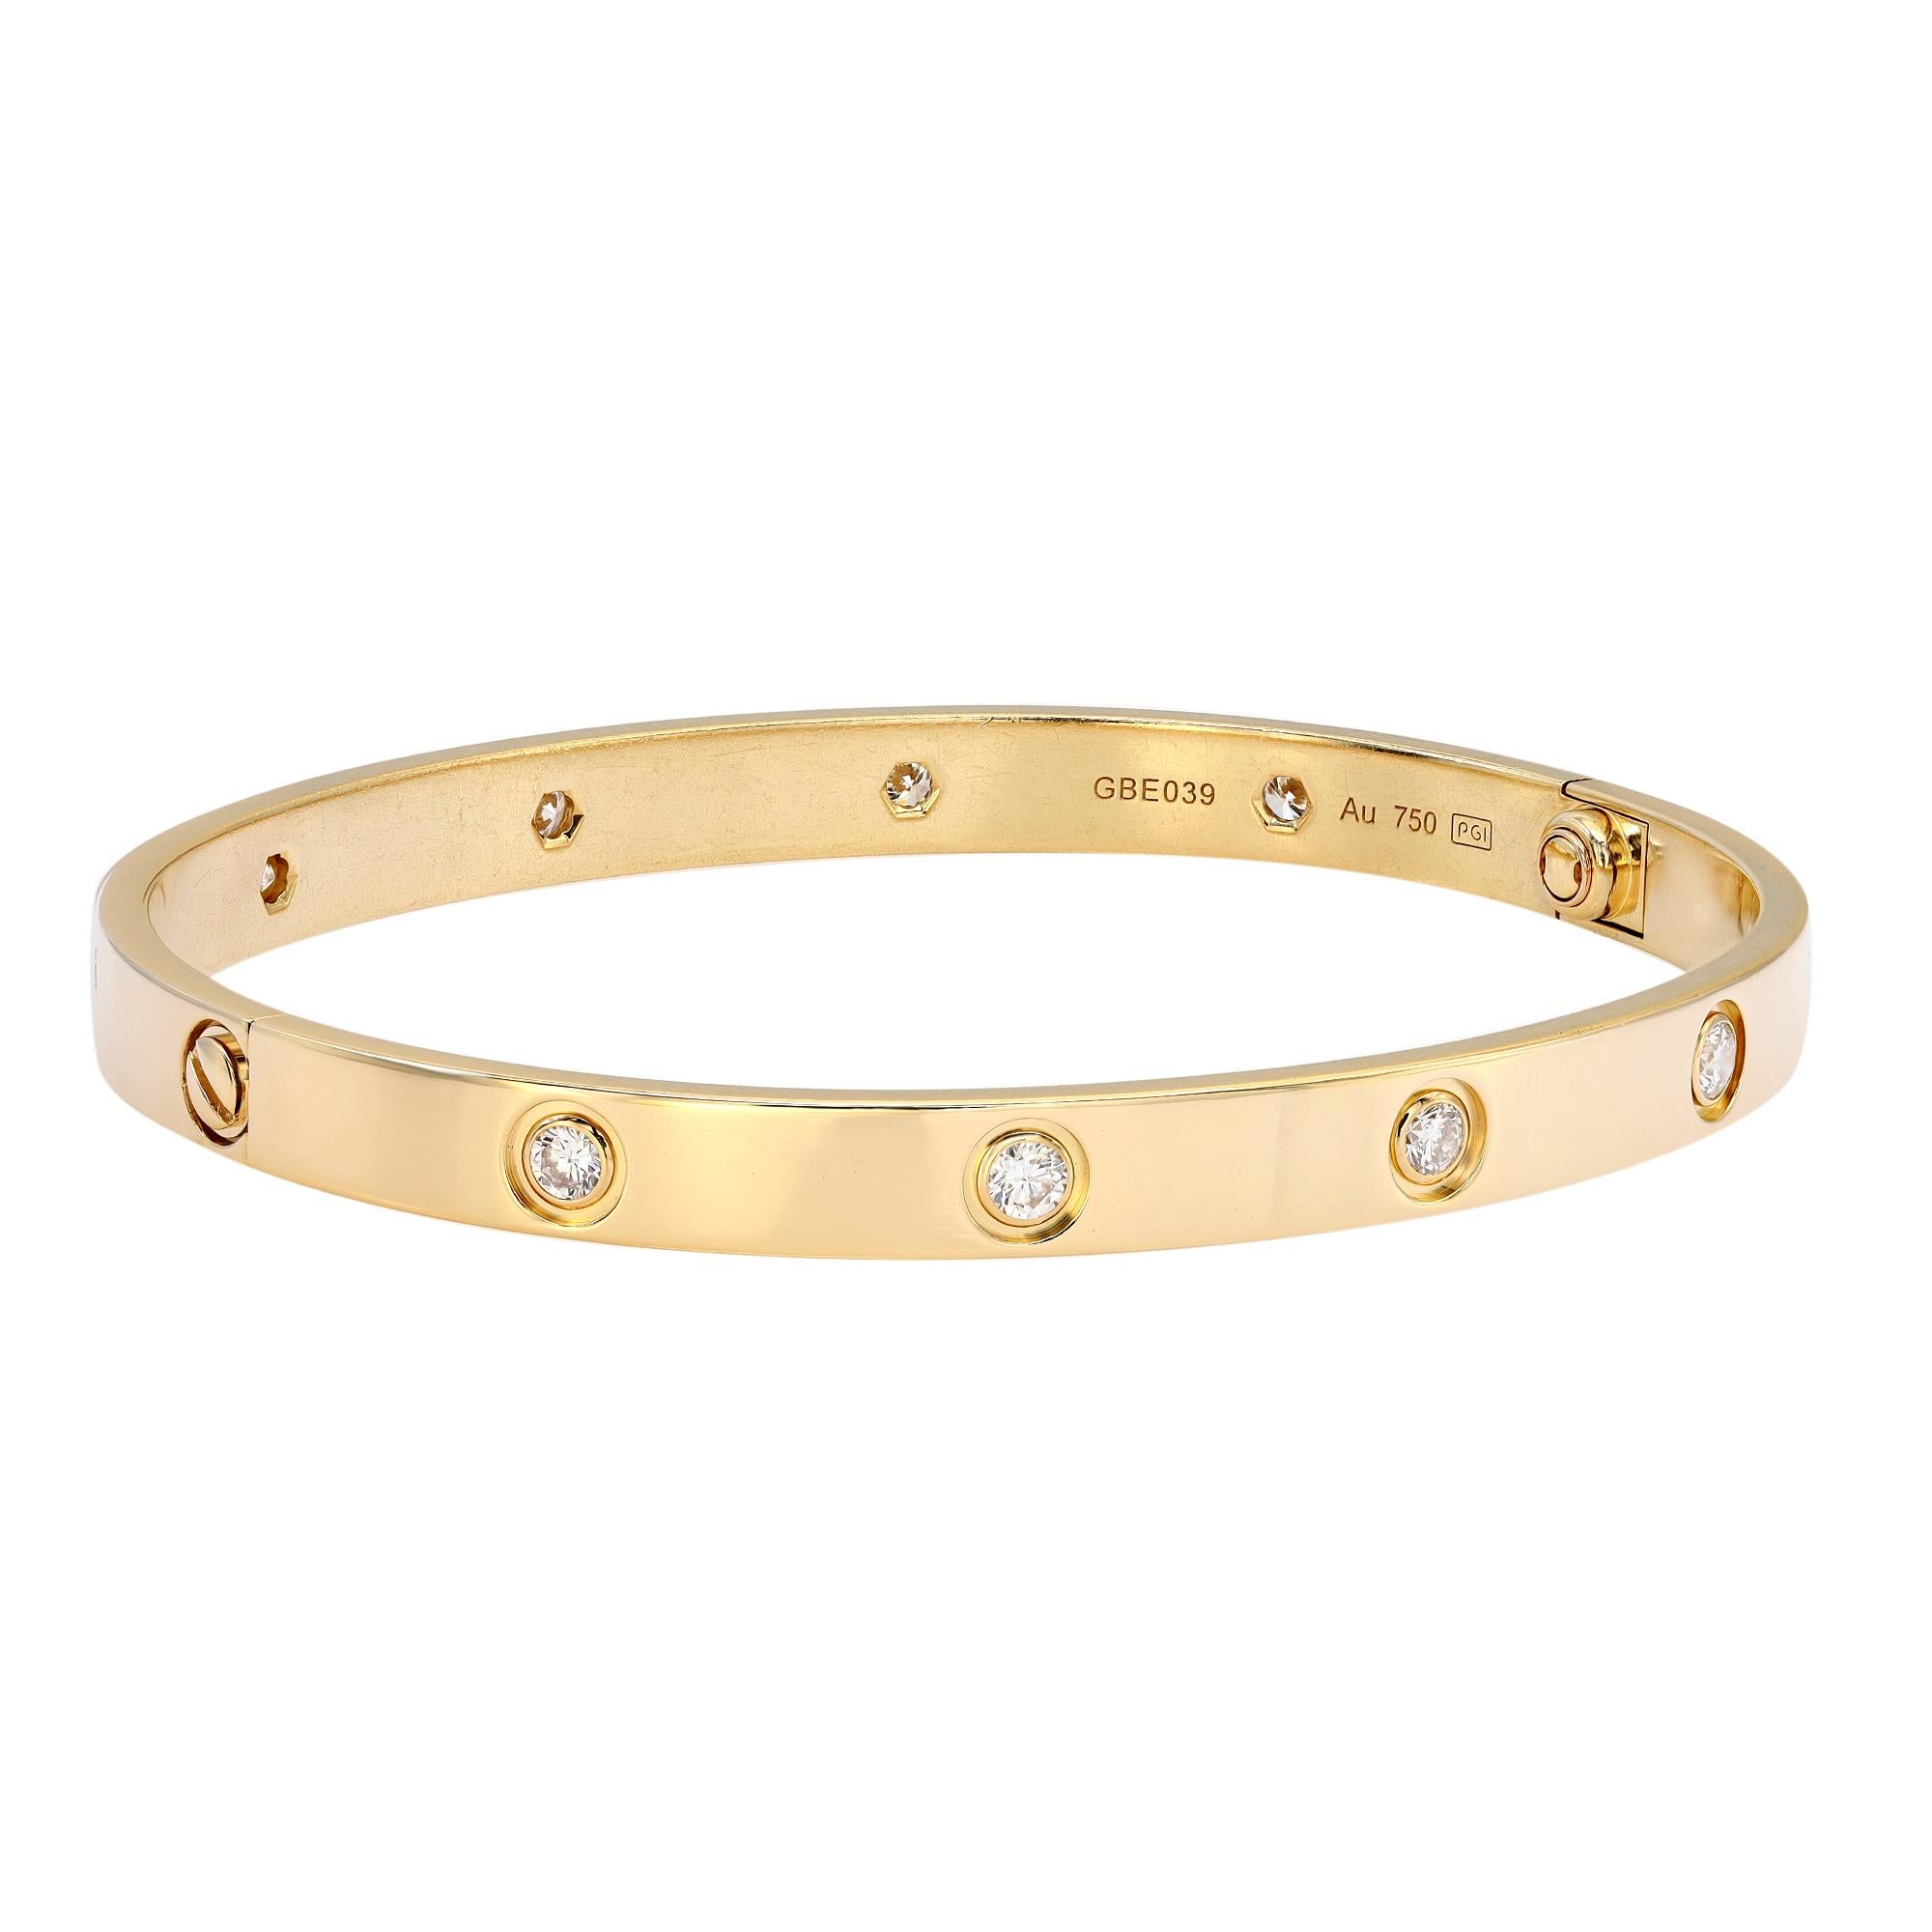 Cartier Love bracelet crafted in 18k yellow gold, set with 10 brilliant-cut diamonds totaling 0.96 carat. New screw system. Comes with a screwdriver. Width: 6.1 mm. Total weight: 32.65 grams. Excellent pre-owned condition. Will be polished before